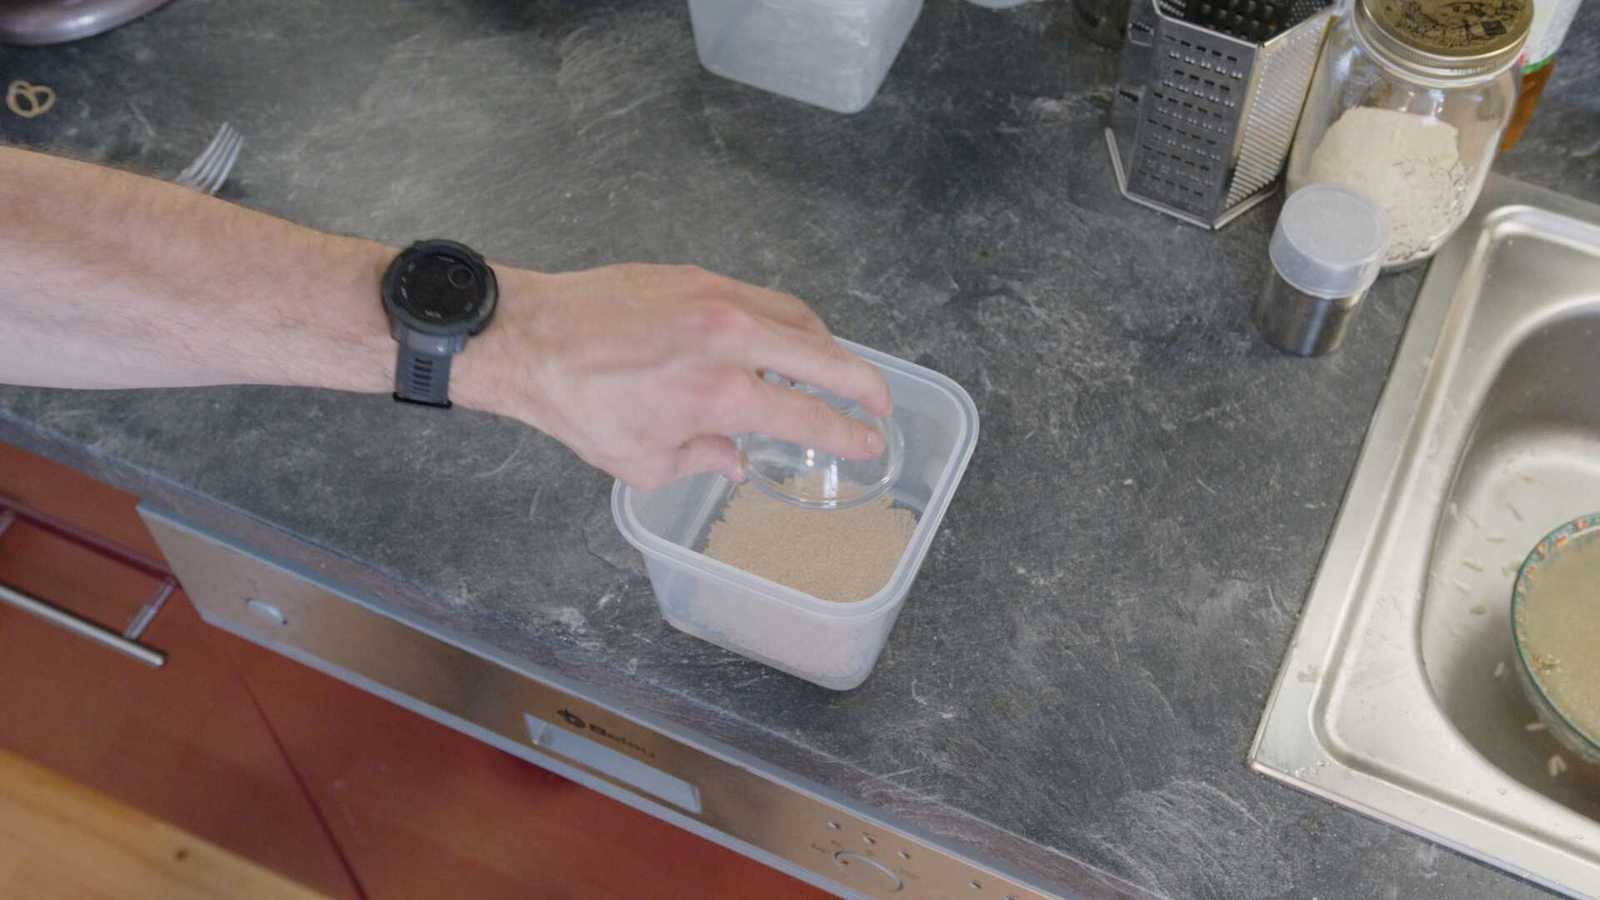 Dry yeast getting added to water